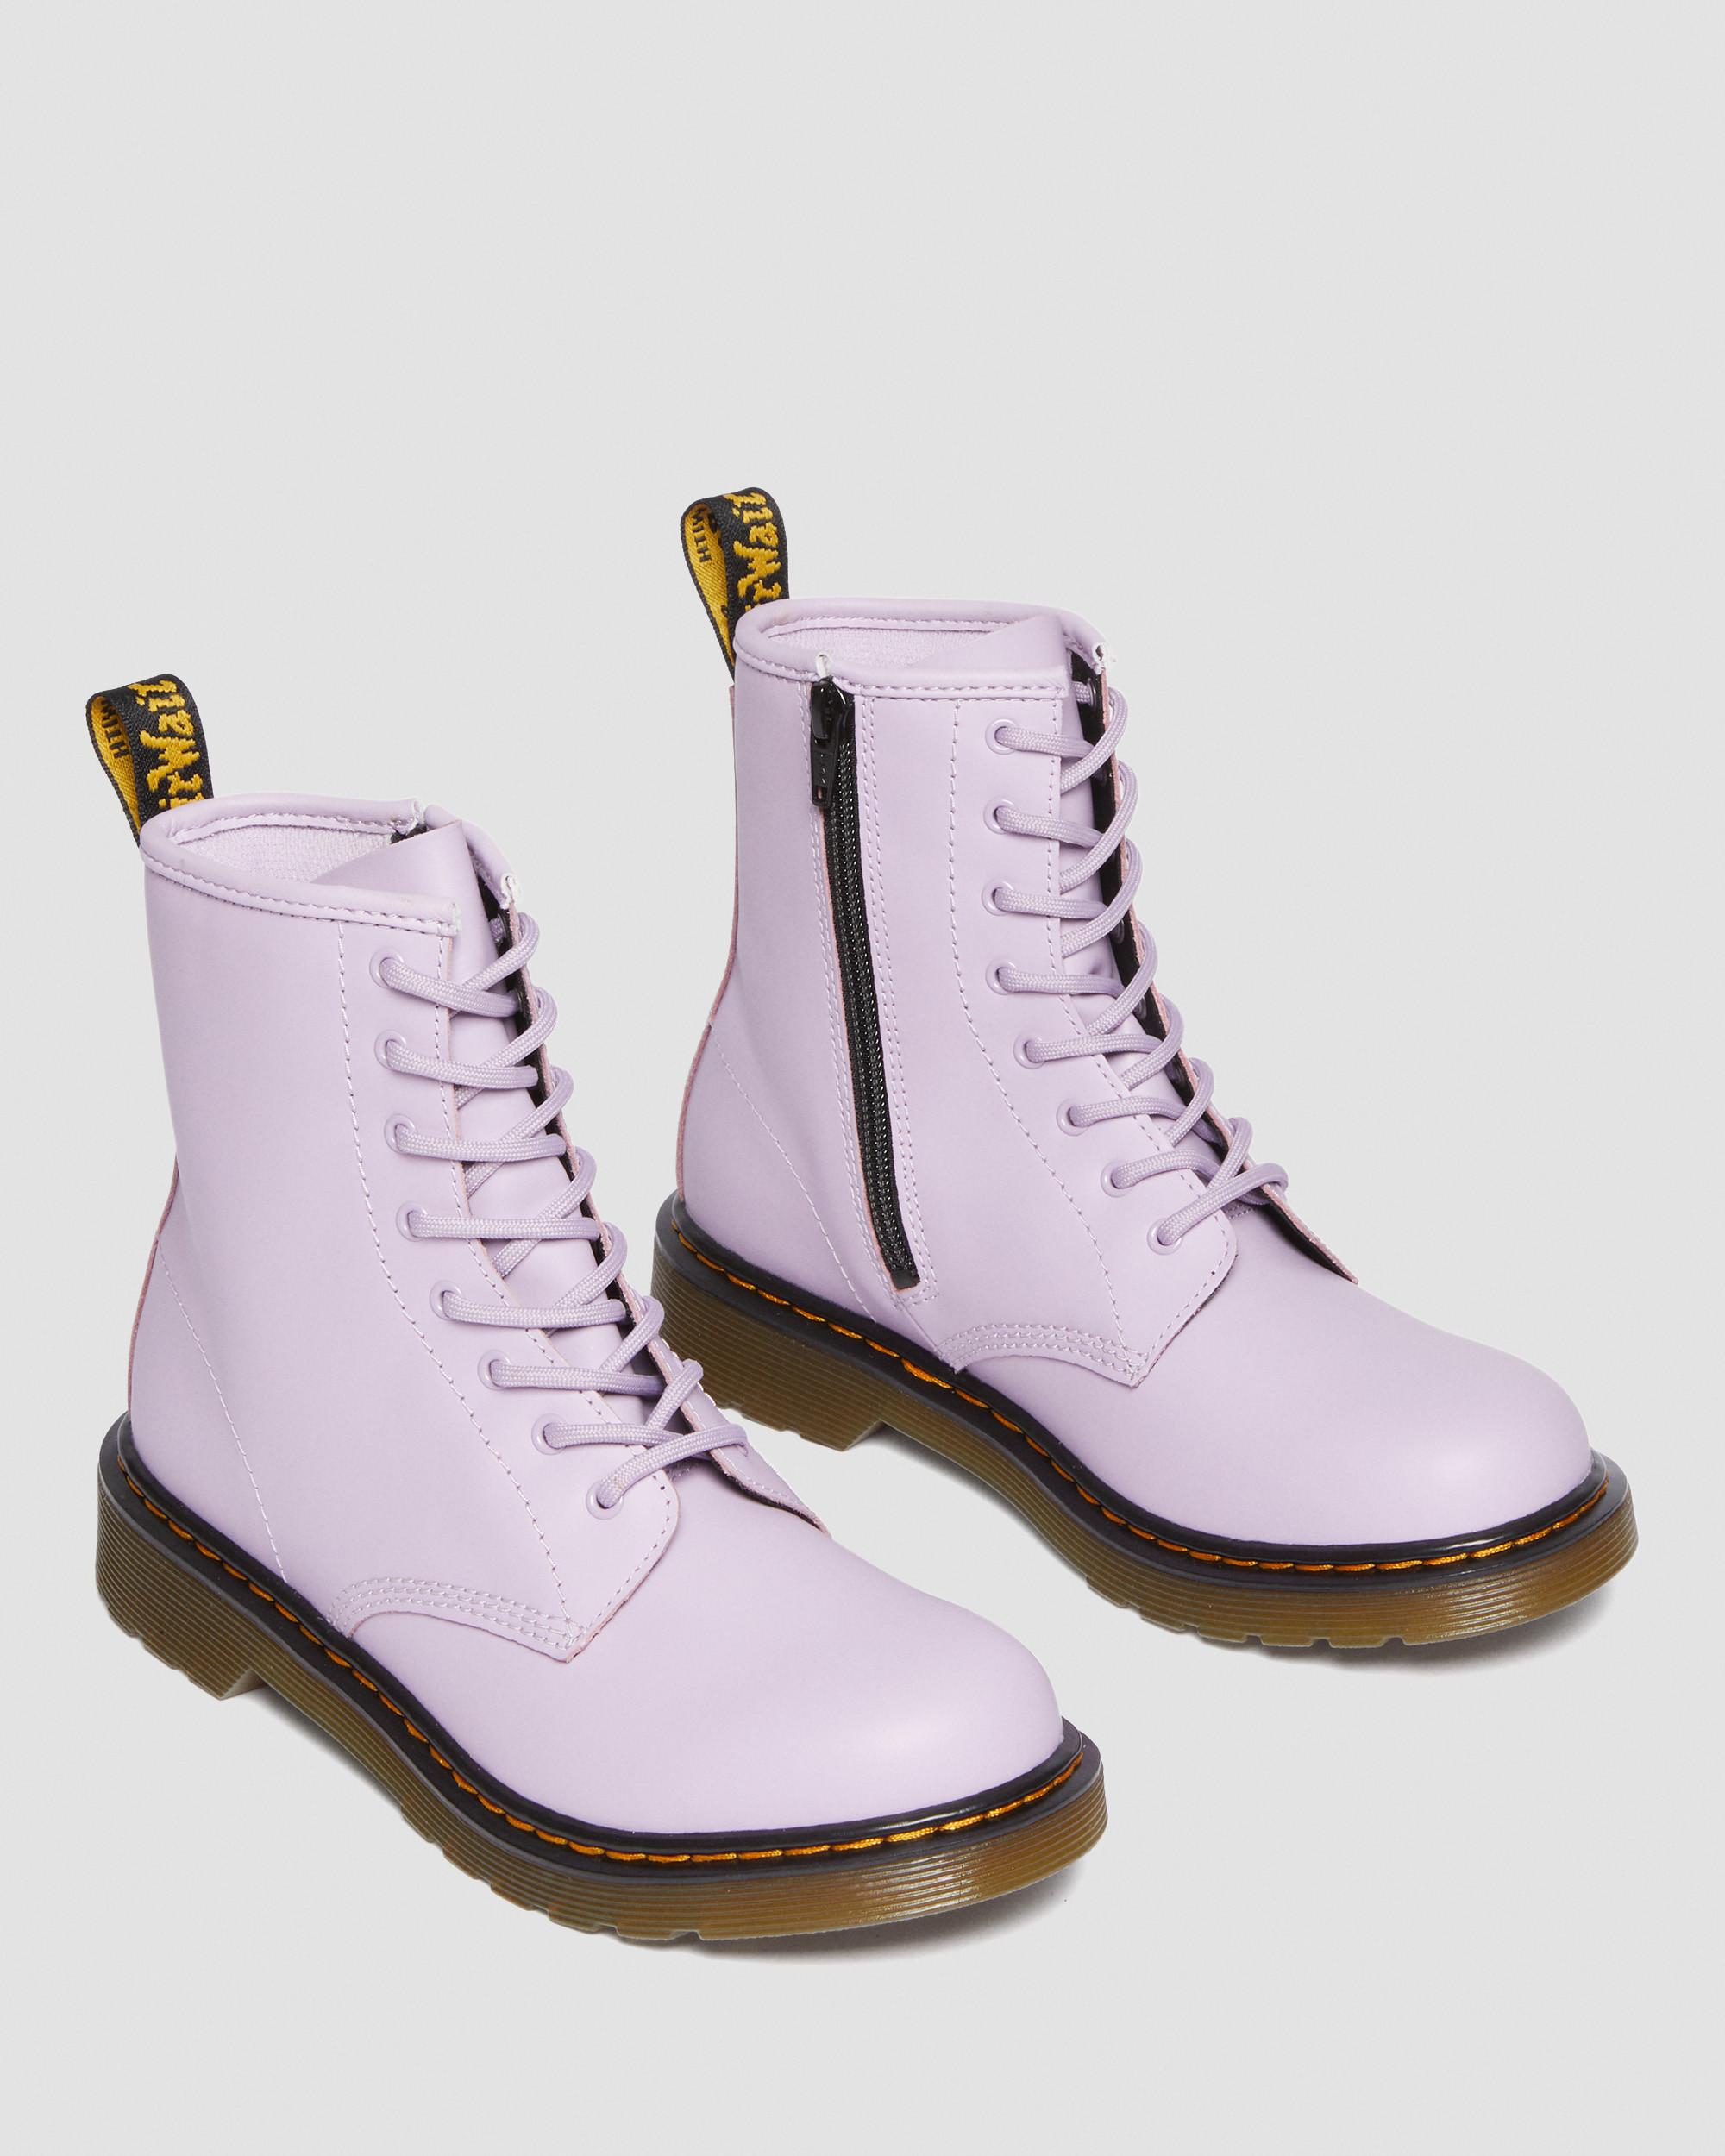 Youth 1460 Romario Leather Up Boots Dr. Lilac Martens in Lace 